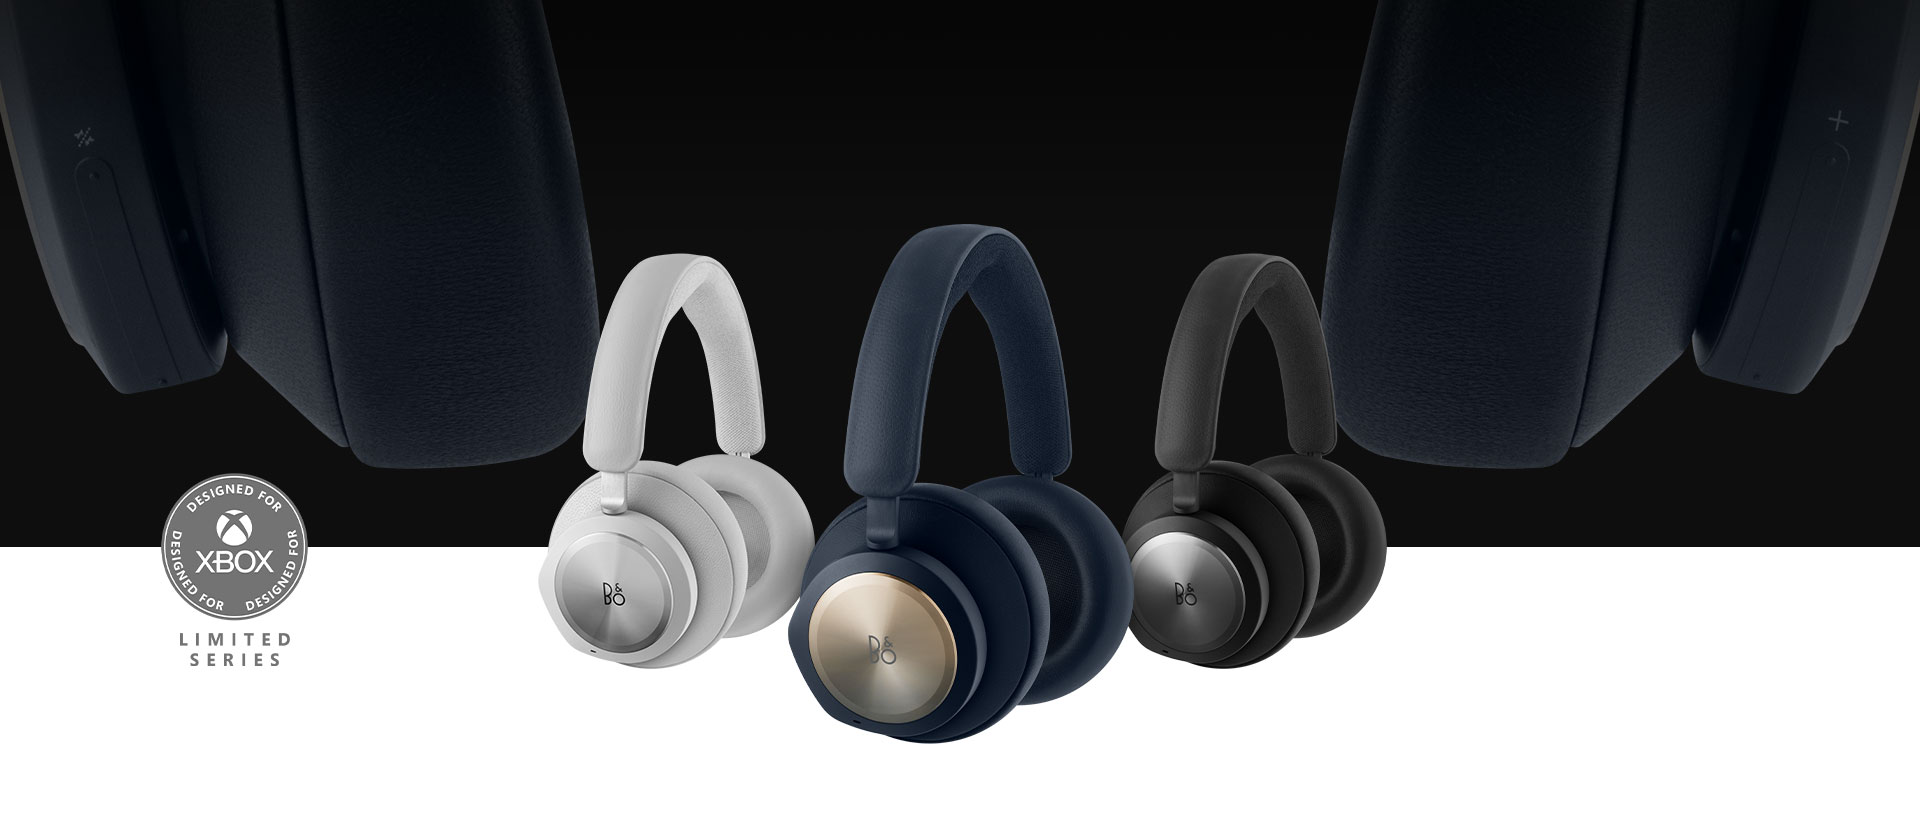 Designed for Xbox, Bang and Olufsen navy headset in front with the black and grey headset beside it